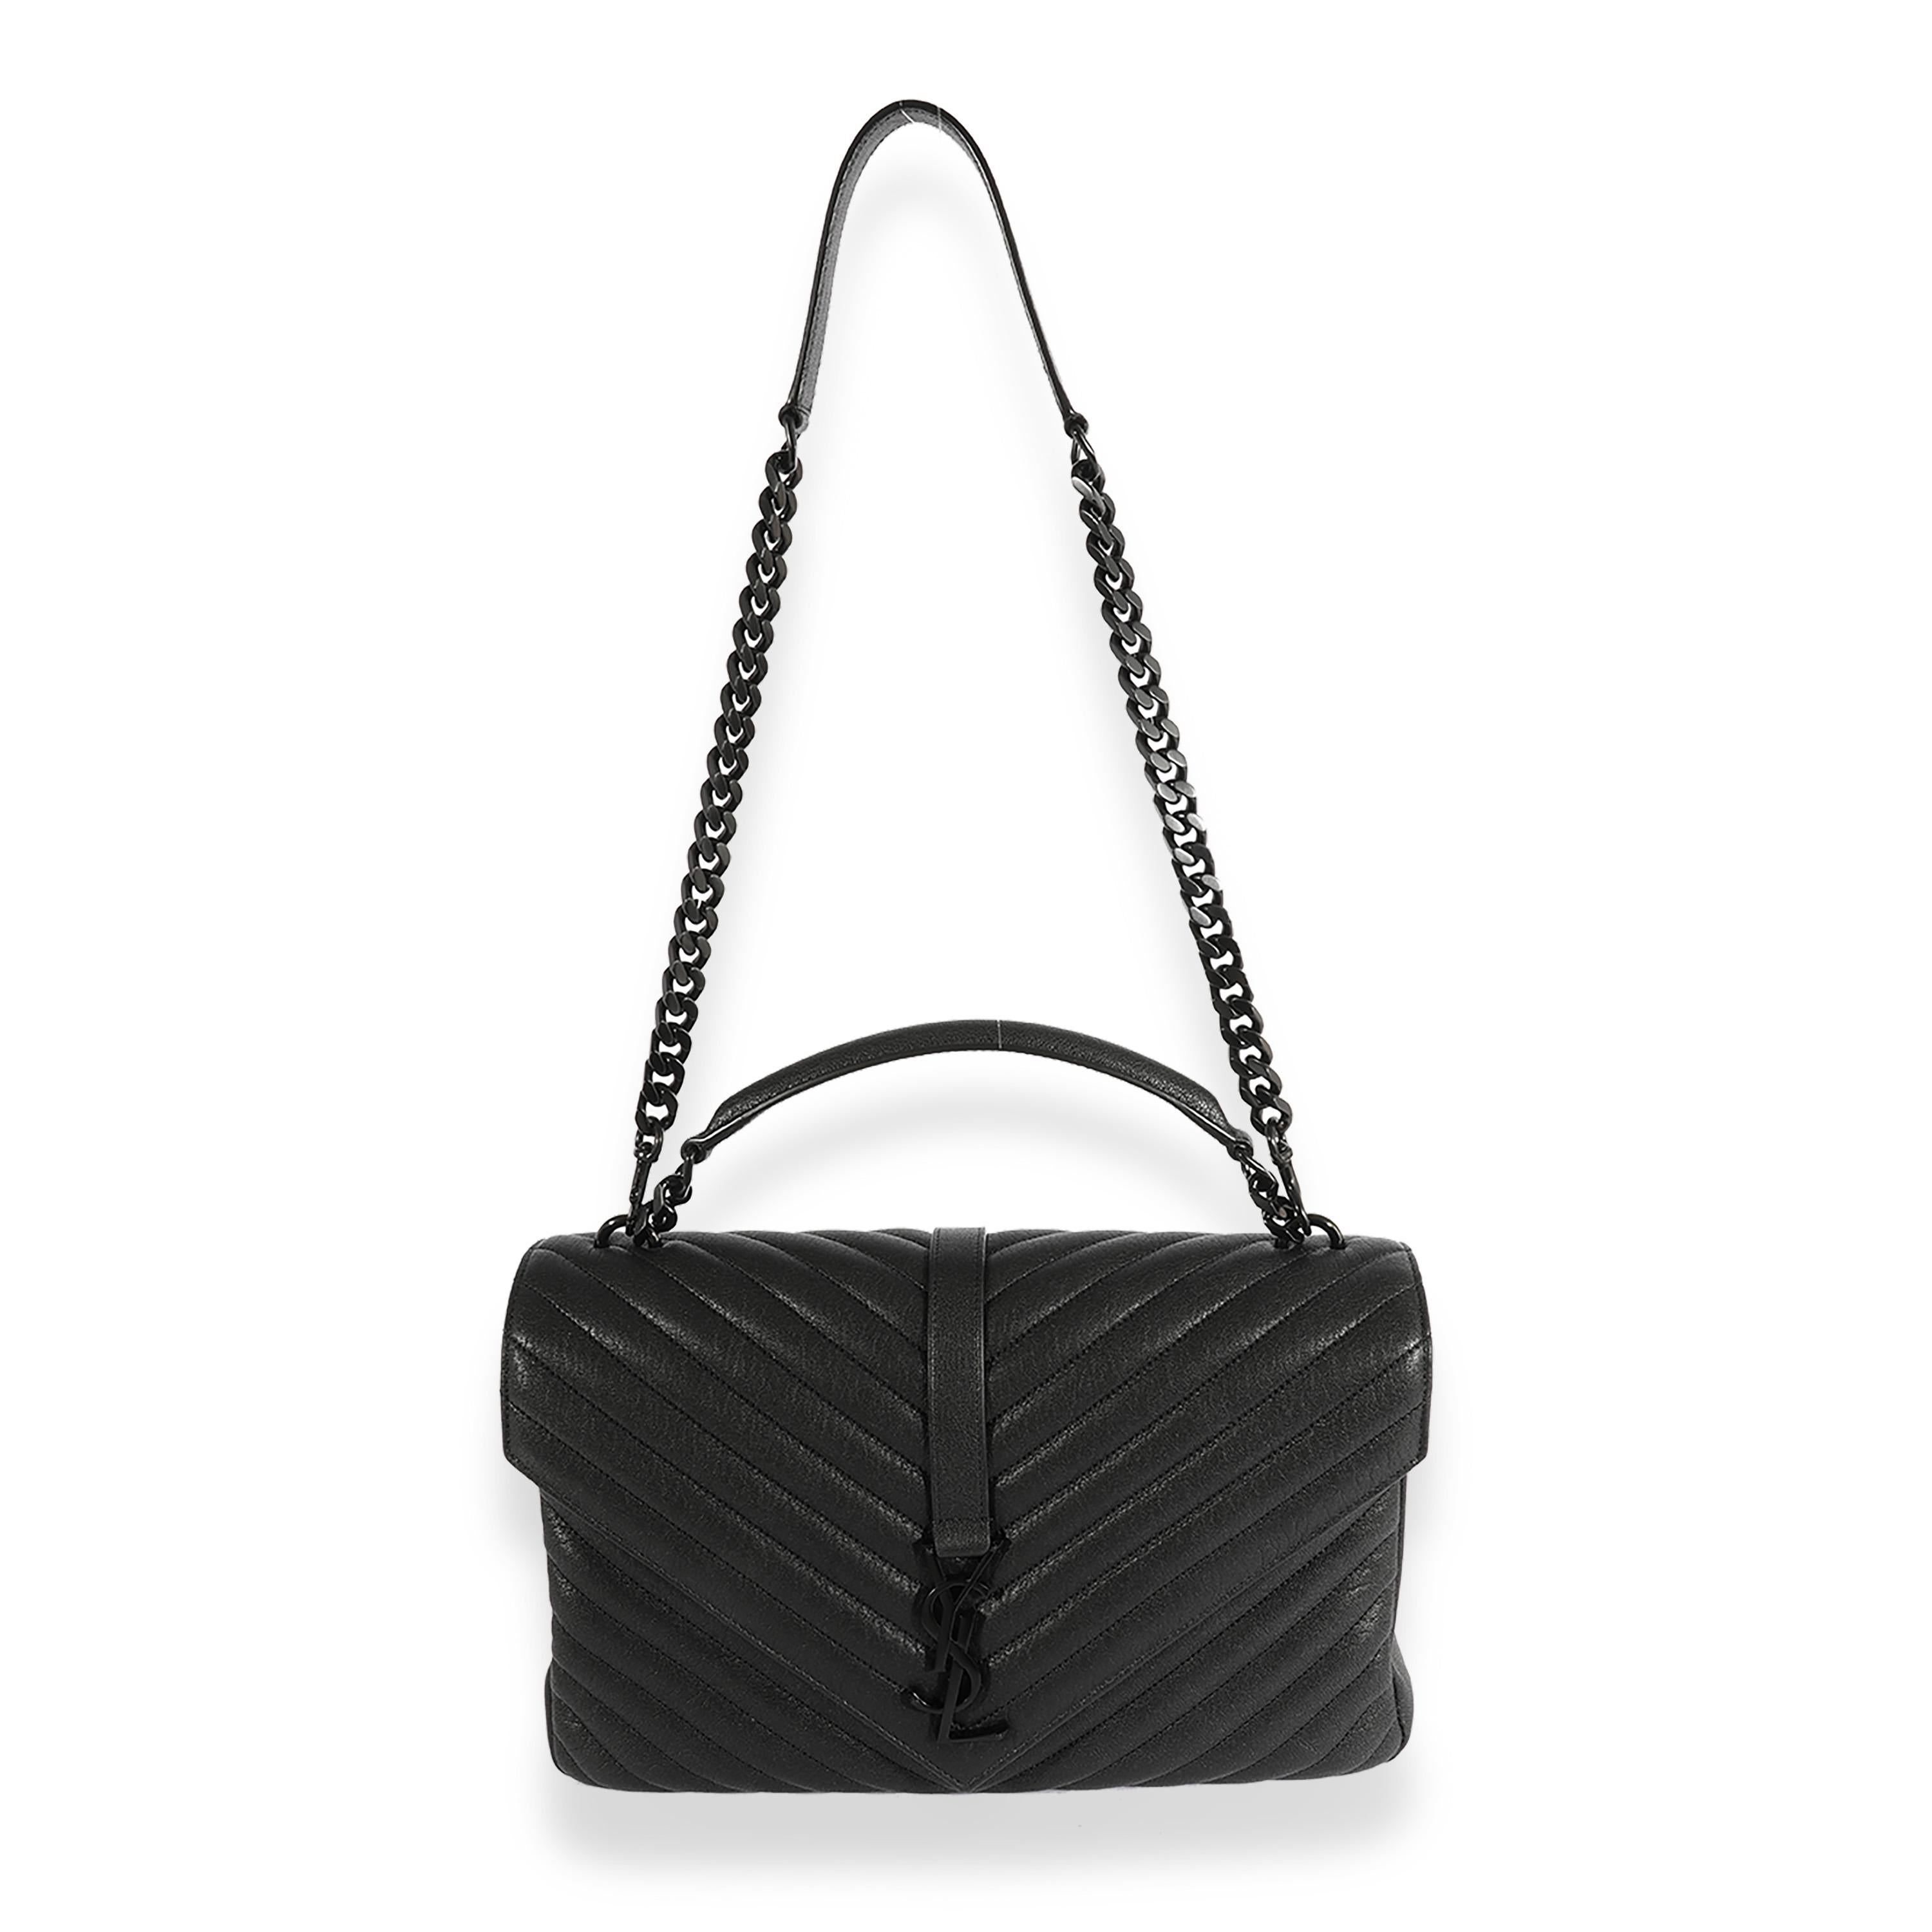 Listing Title: Saint Laurent So Black Matelassé Leather Large College Bag
SKU: 123458
MSRP: 2990.00
Condition: Pre-owned 
Handbag Condition: Excellent
Condition Comments: Excellent Condition. Plastic at some hardware. Scuffing throughout interior.